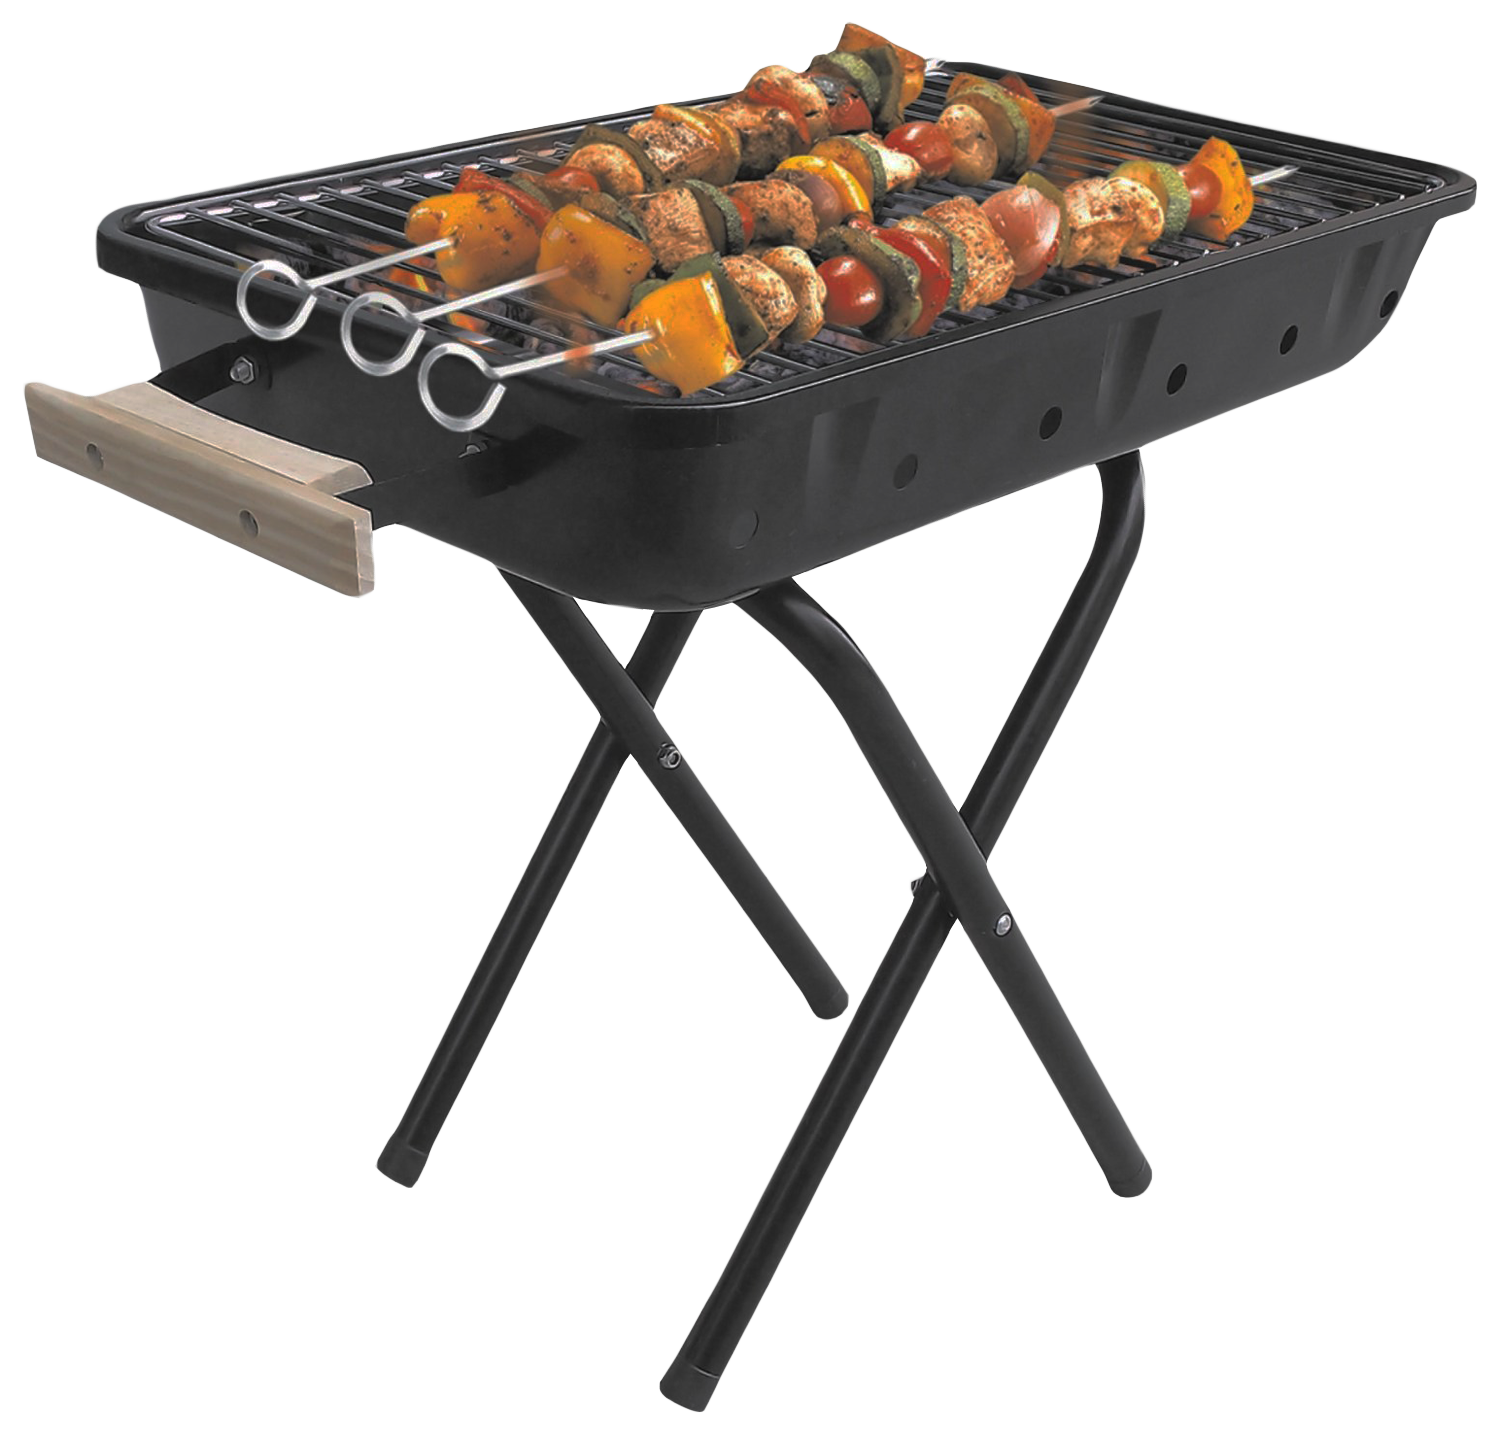 Free PNG Grill - 47965